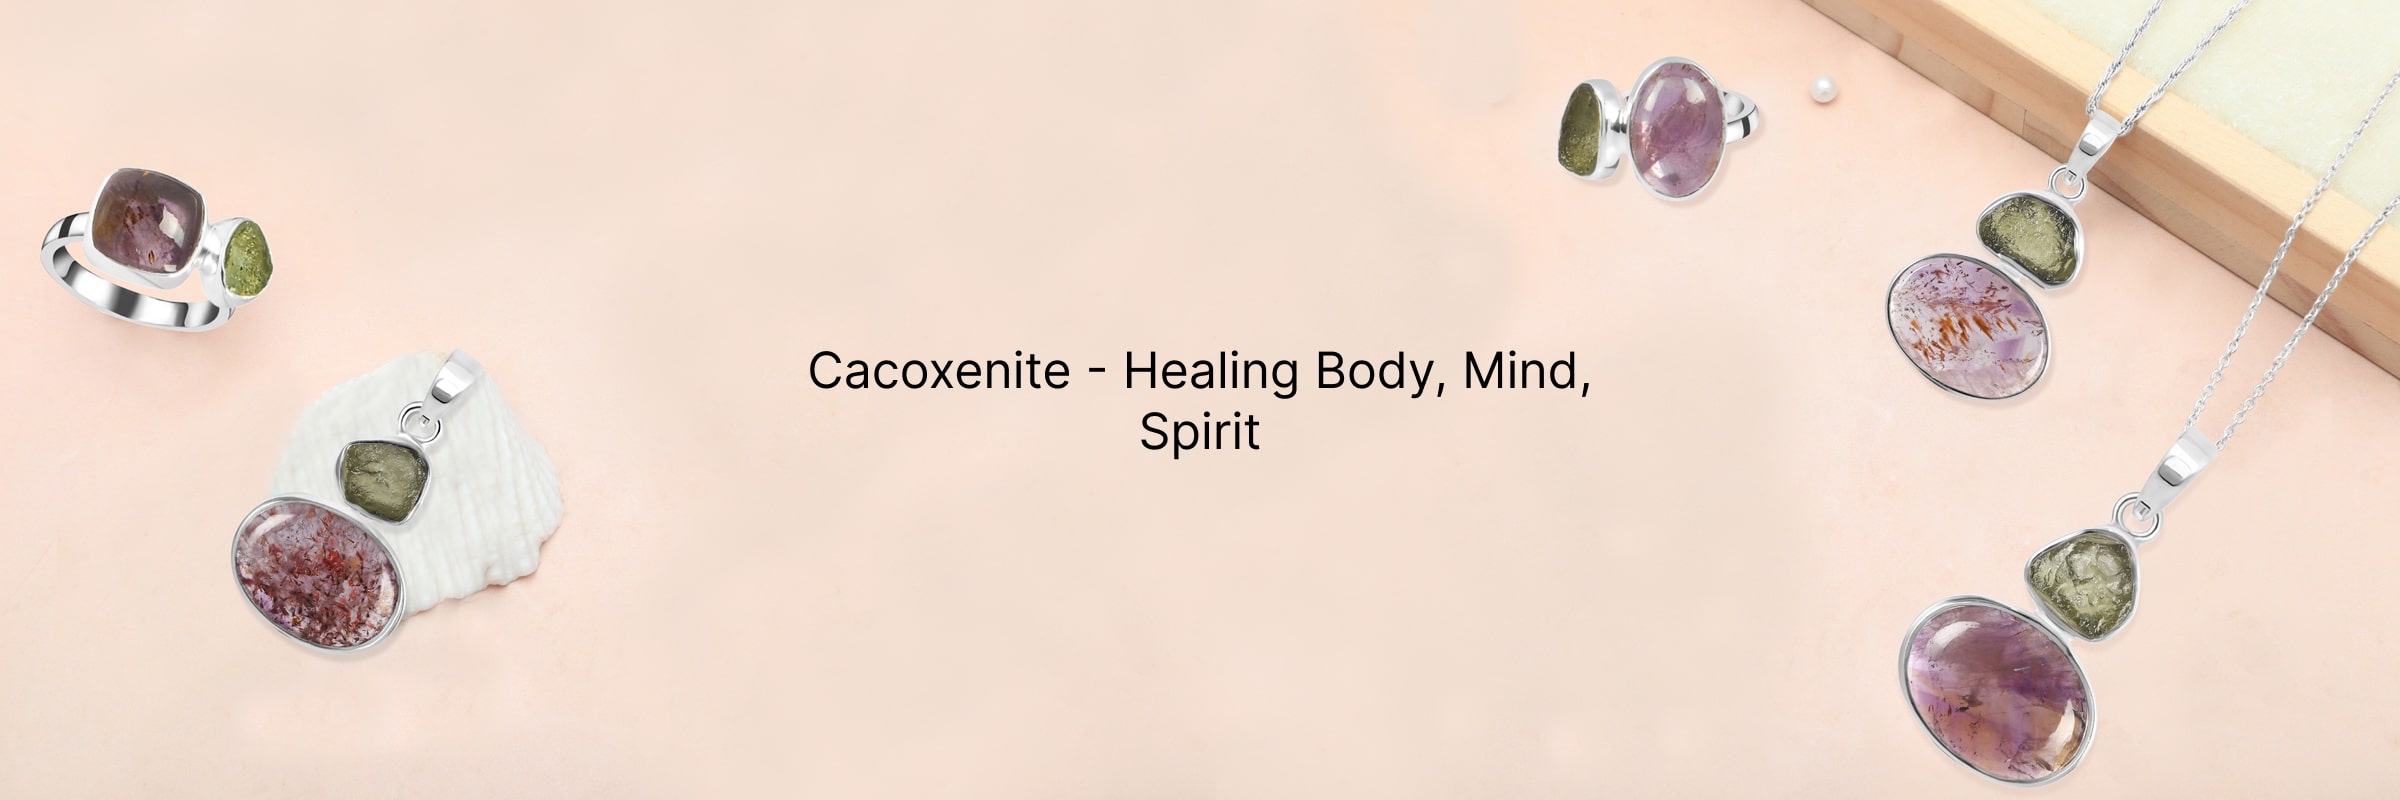 Cacoxenite Physical Healing properties